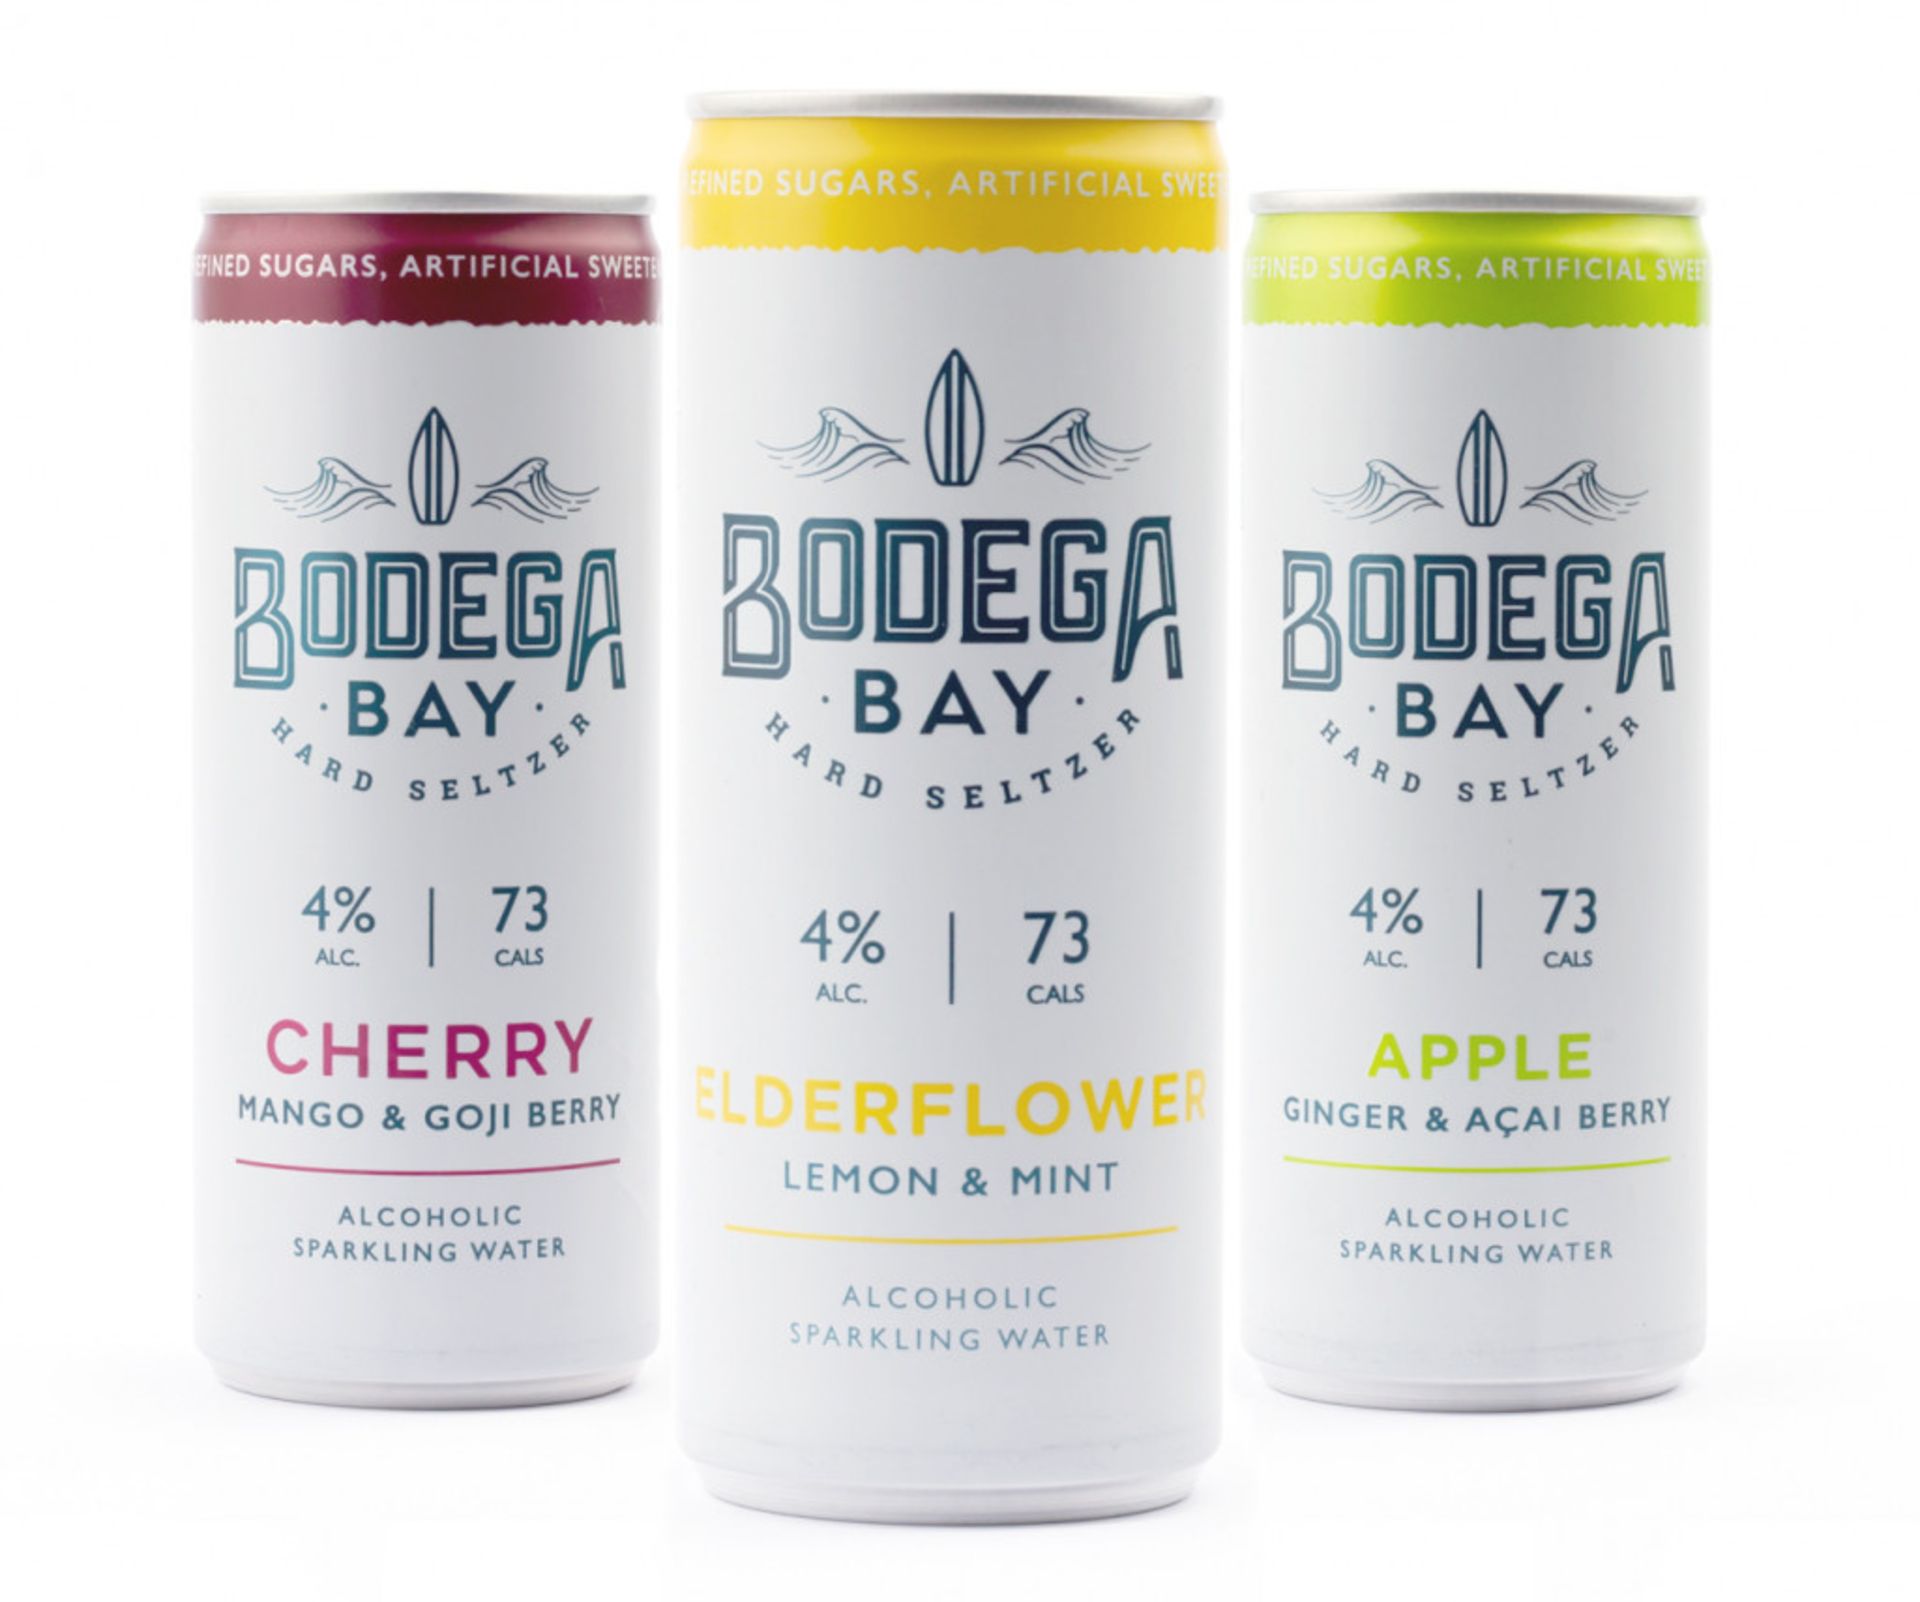 1,080 x Cans of Bodega Bay Hard Seltzer 250ml Alcoholic Sparkling Water Drinks - RESALE JOB LOT - Image 6 of 30